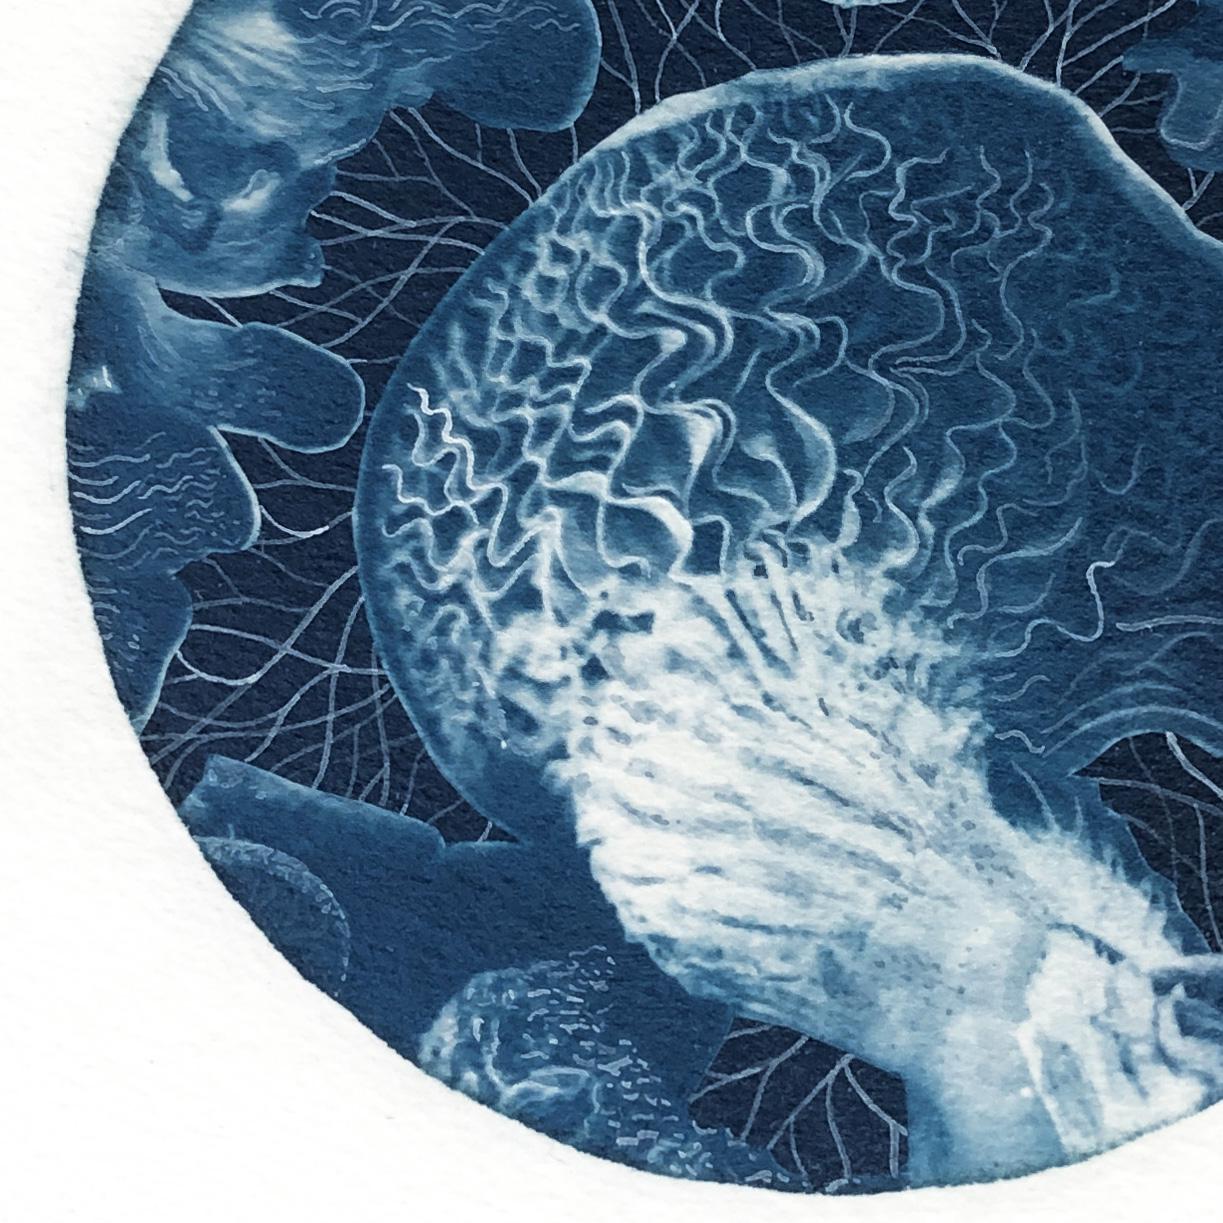 A Conceptually Surreal Watercolor on Cyanotype, 